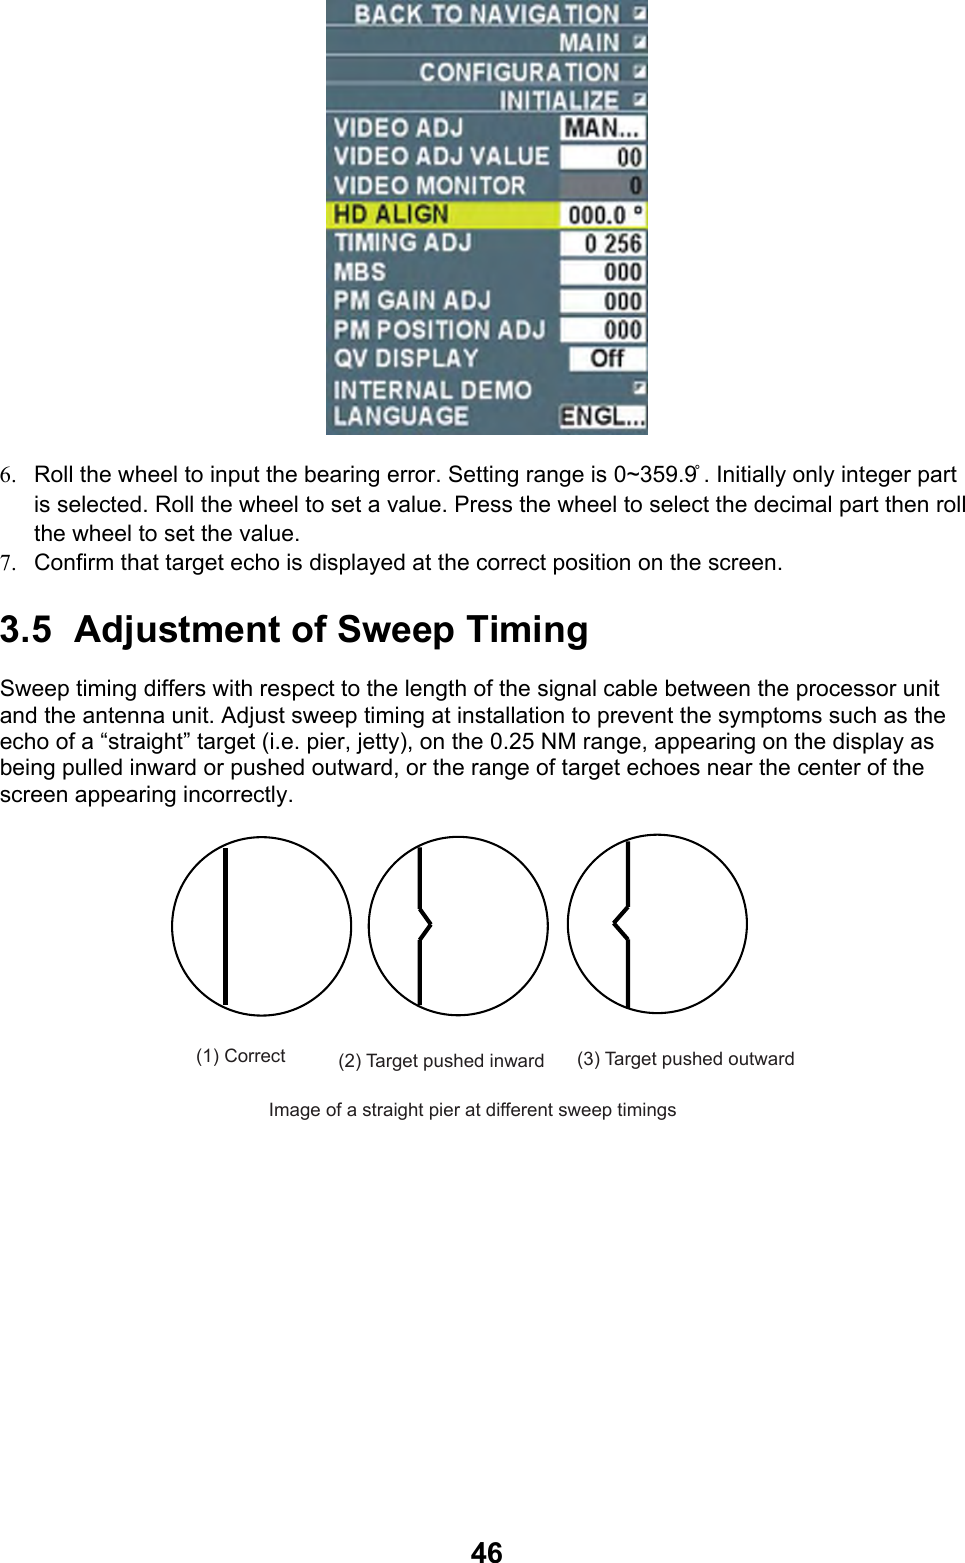  46 6.  Roll the wheel to input the bearing error. Setting range is 0~359.9 ̊. Initially only integer part is selected. Roll the wheel to set a value. Press the wheel to select the decimal part then roll the wheel to set the value. 7.  Confirm that target echo is displayed at the correct position on the screen. 3.5  Adjustment of Sweep Timing Sweep timing differs with respect to the length of the signal cable between the processor unit and the antenna unit. Adjust sweep timing at installation to prevent the symptoms such as the echo of a “straight” target (i.e. pier, jetty), on the 0.25 NM range, appearing on the display as being pulled inward or pushed outward, or the range of target echoes near the center of the screen appearing incorrectly. (1) Correct (2) Target pushed inward (3) Target pushed outwardImage of a straight pier at different sweep timings 